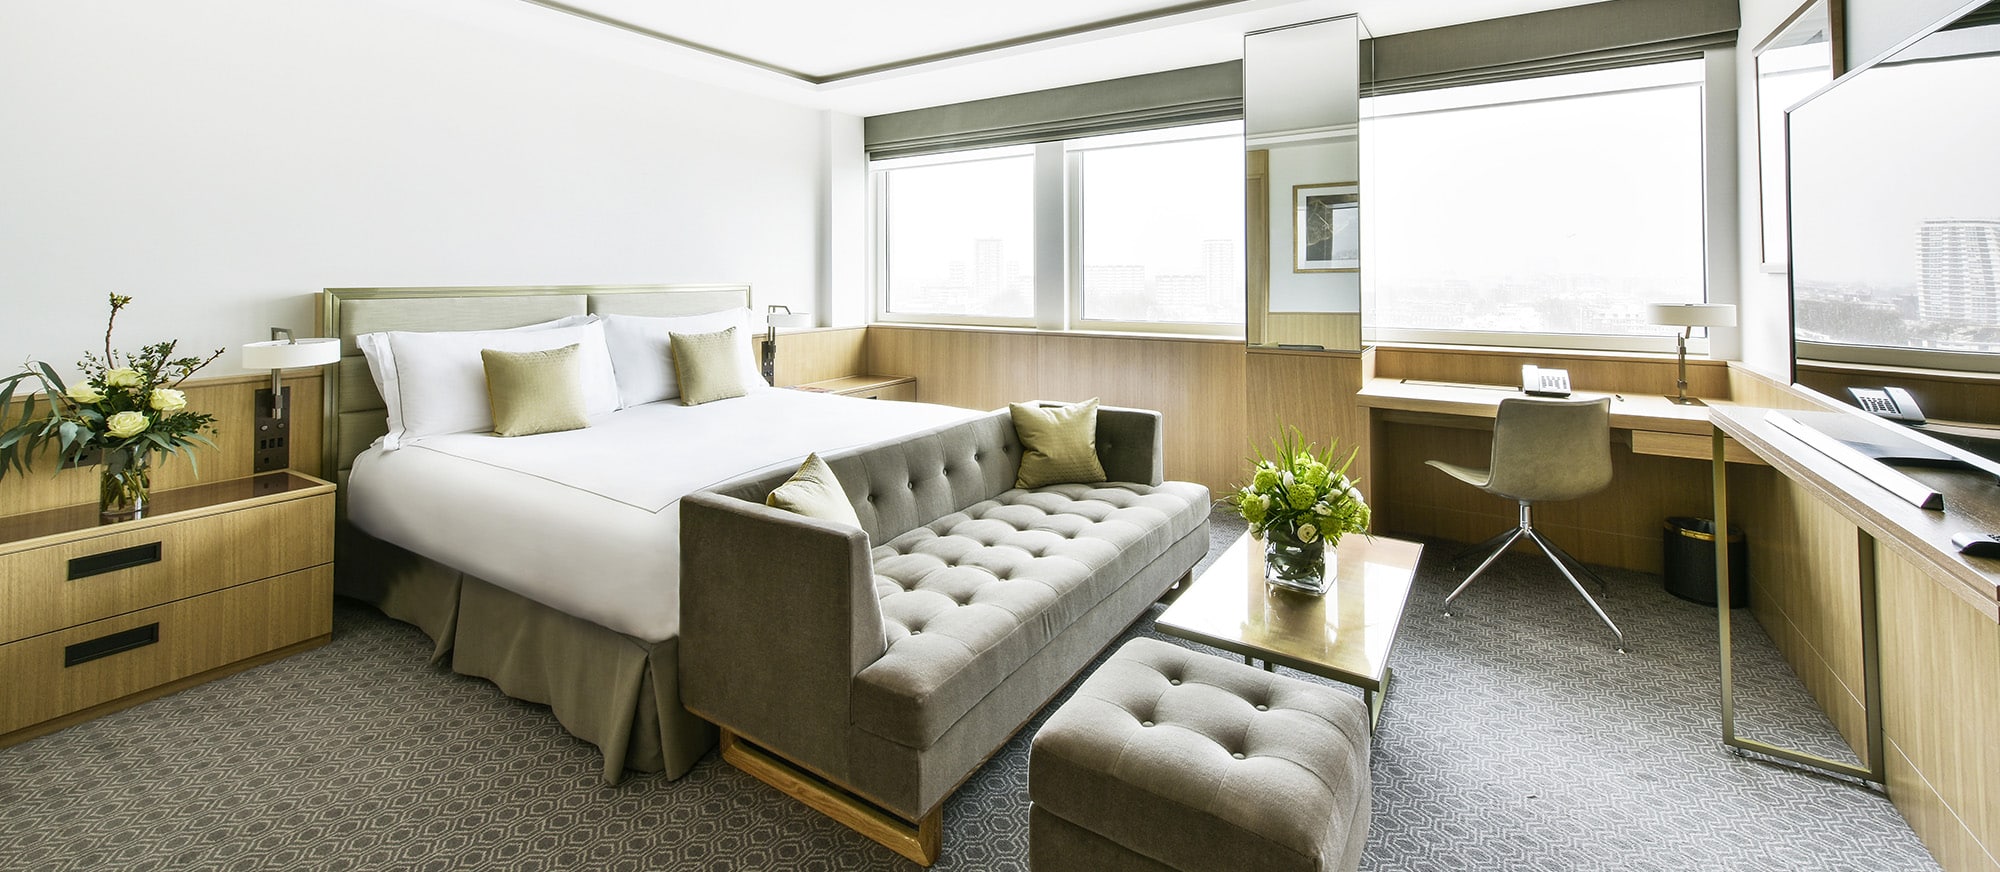 Executive Hotel Rooms With Views Over Hyde Park London